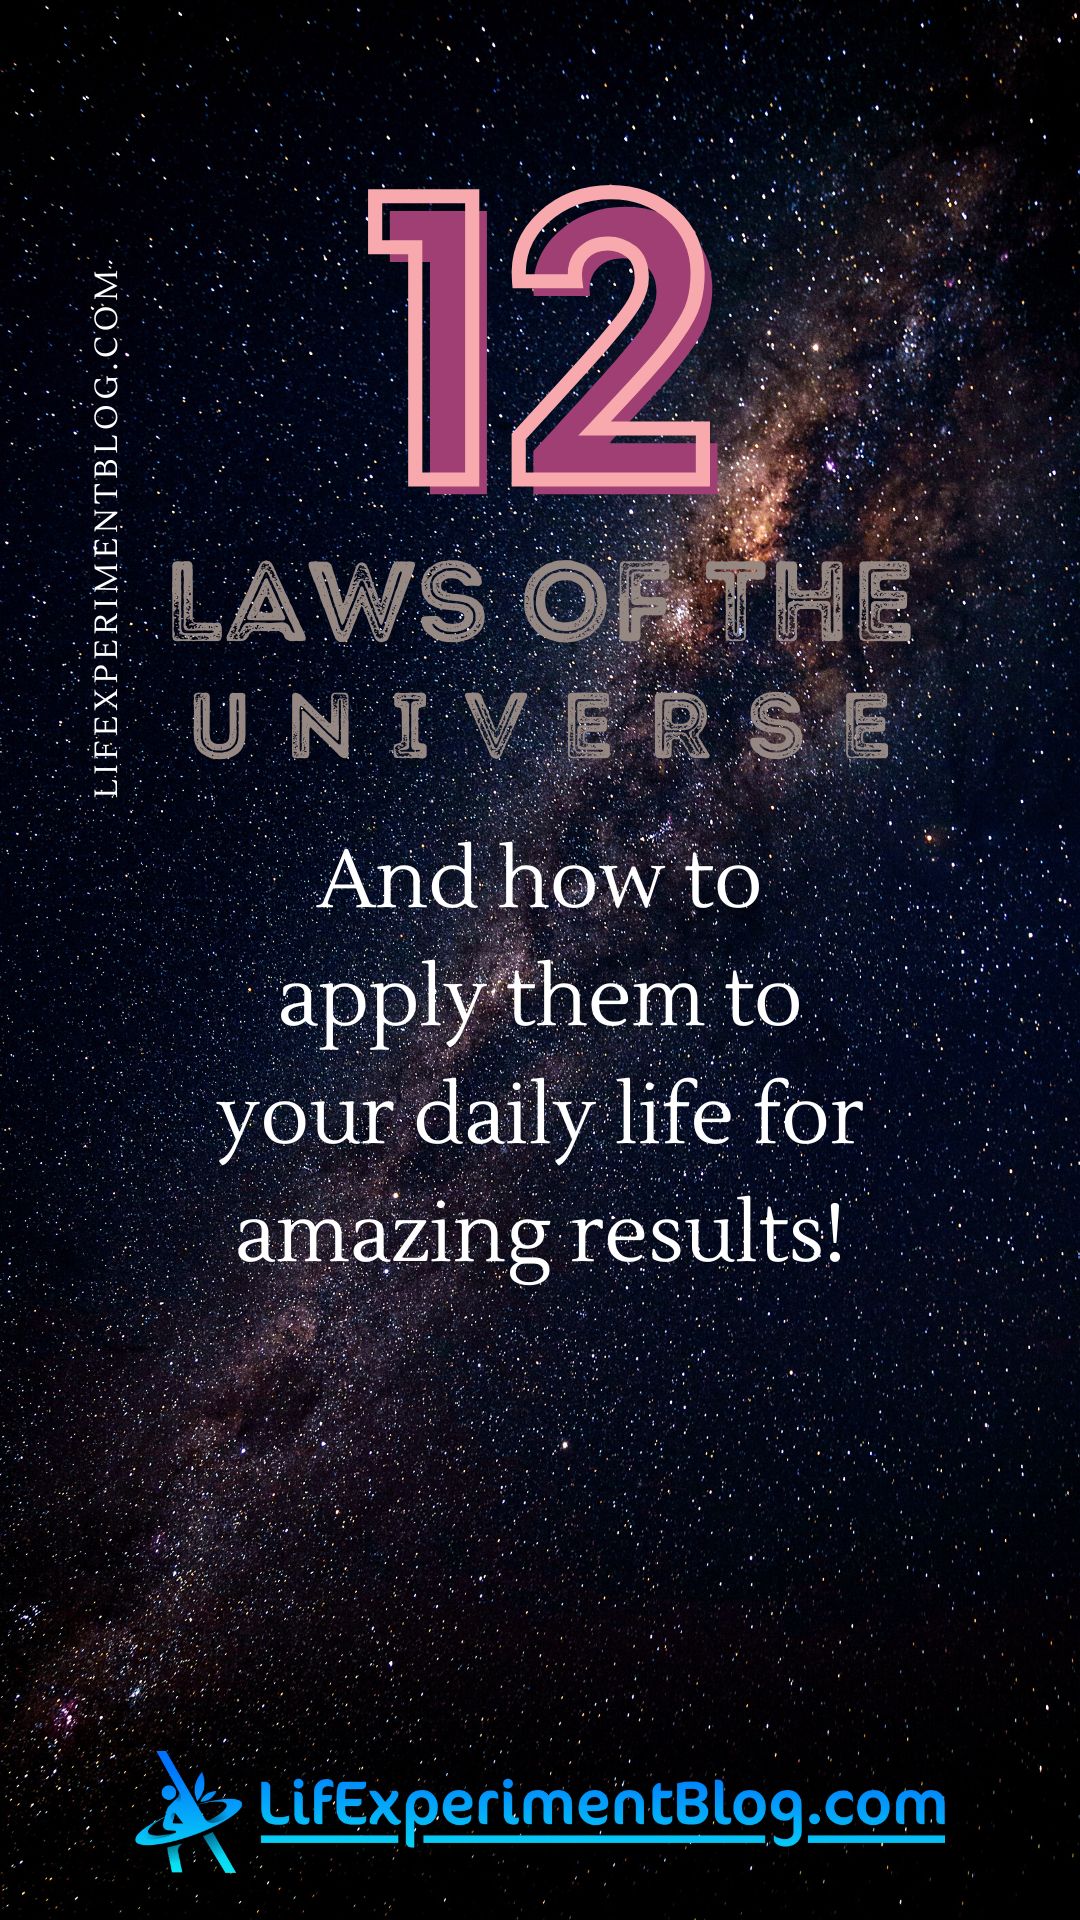 12 Laws of the Universe pin with an image of space and text overlay.